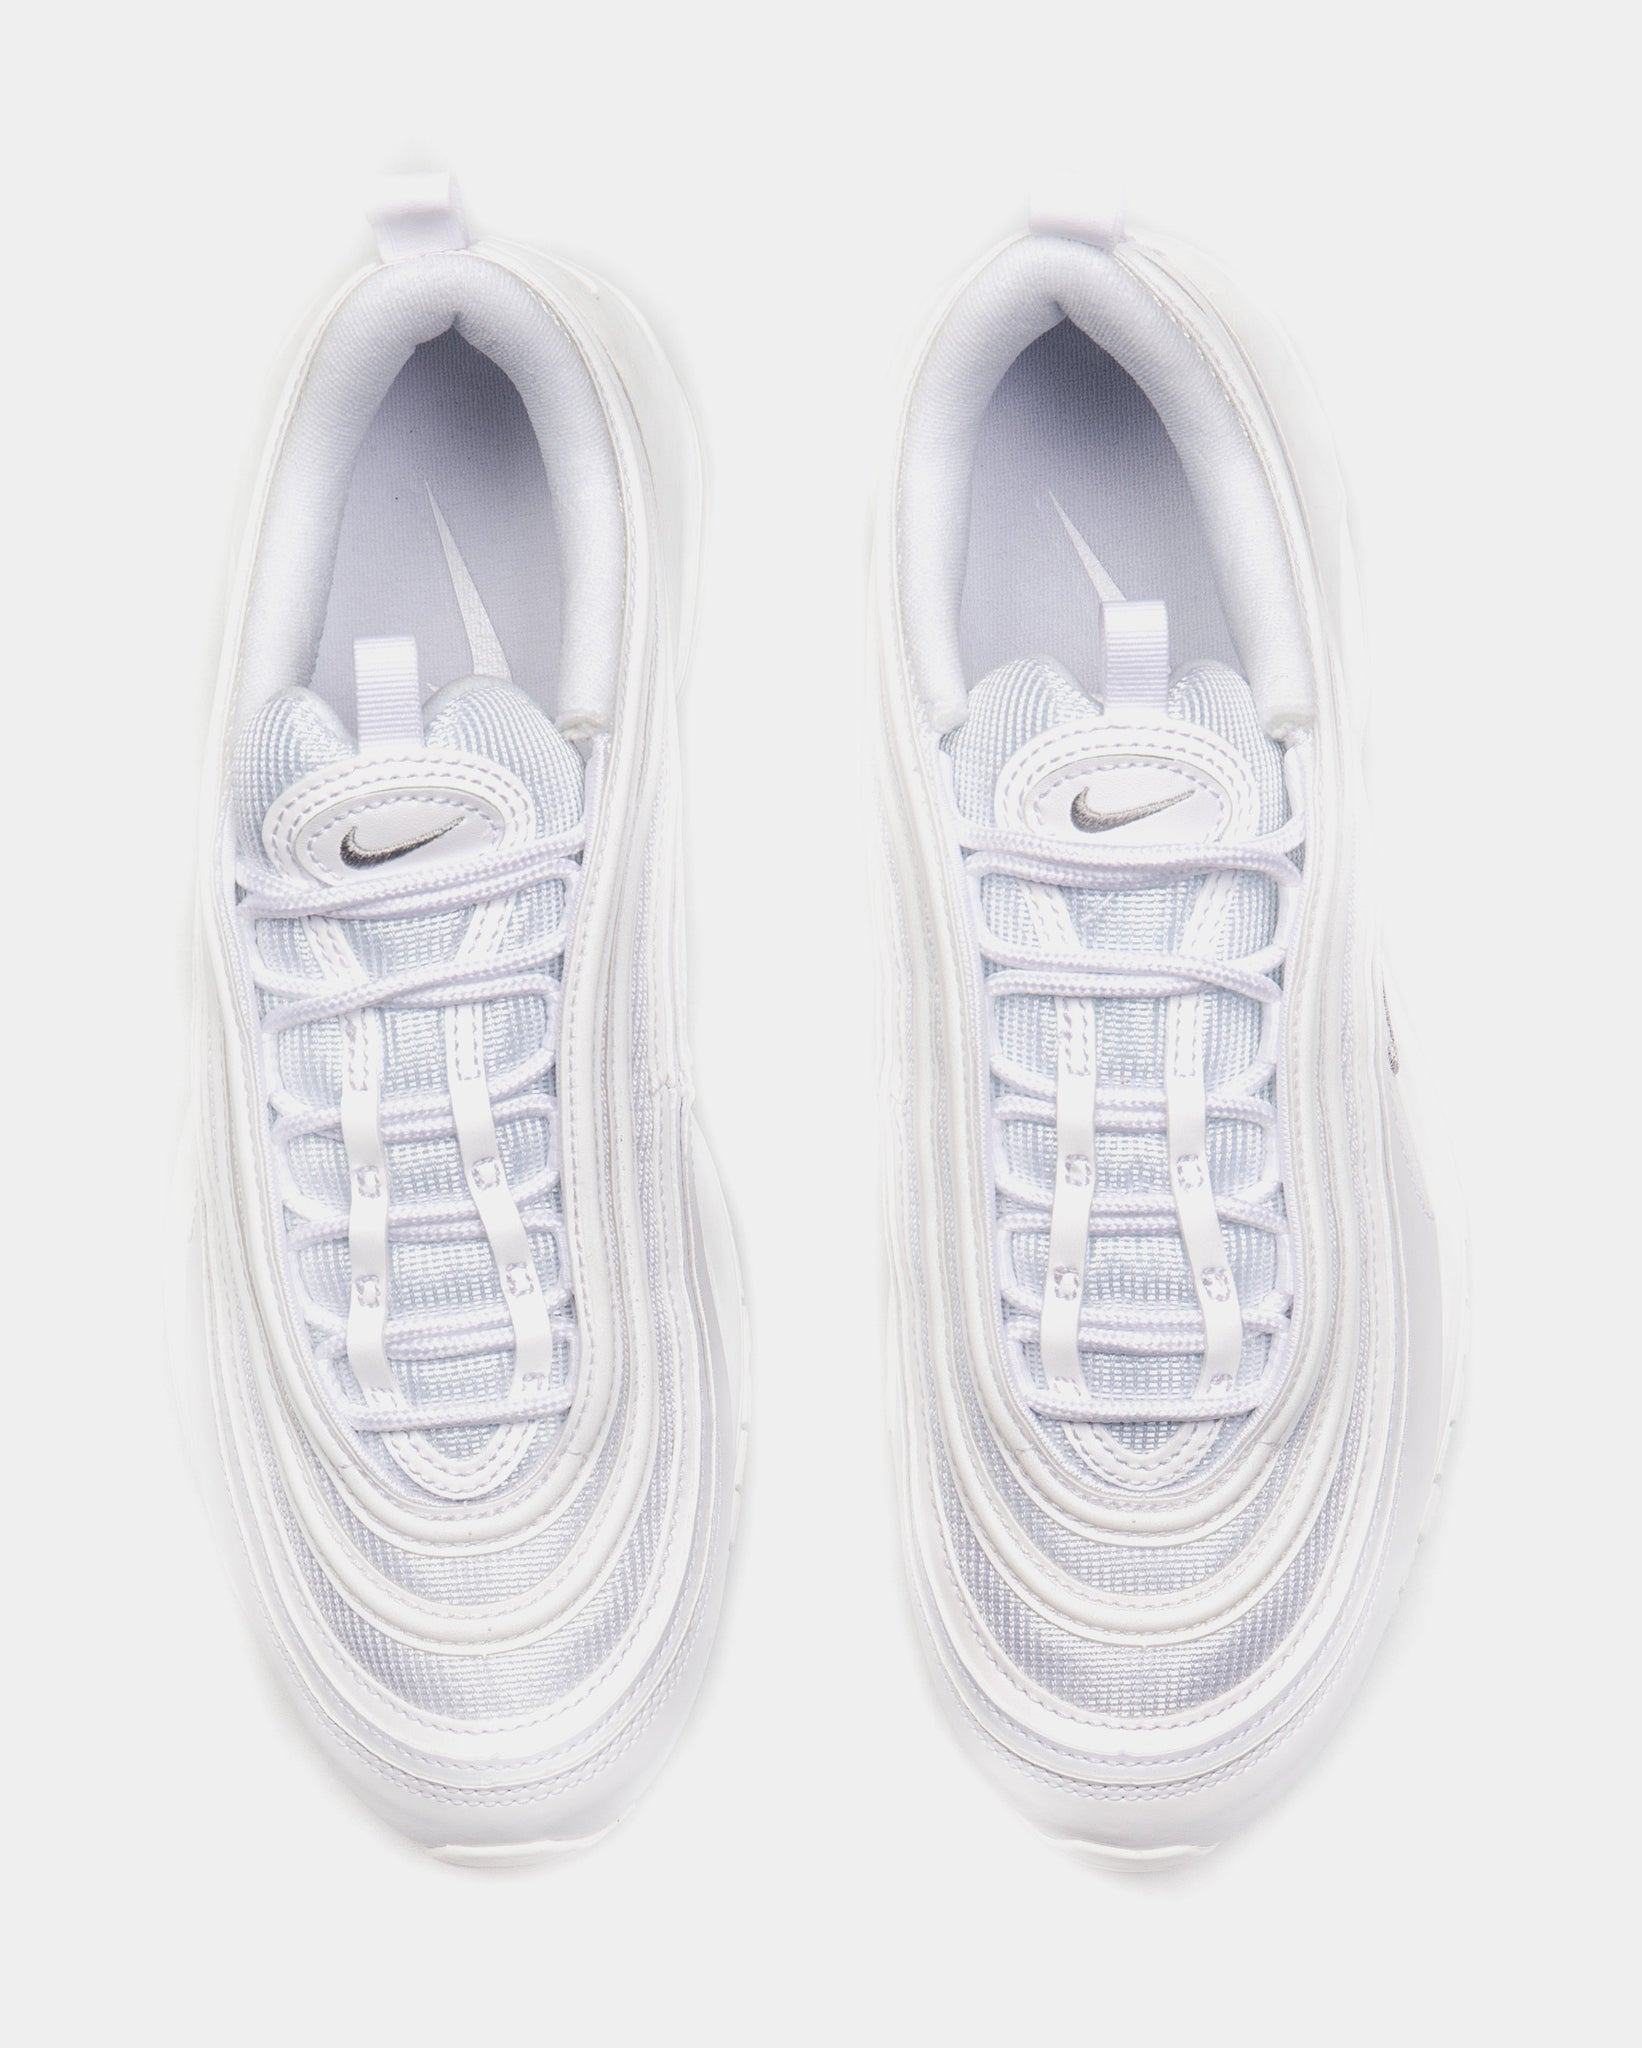 Nike Air Max 97: A Complete Guide - Fastsole